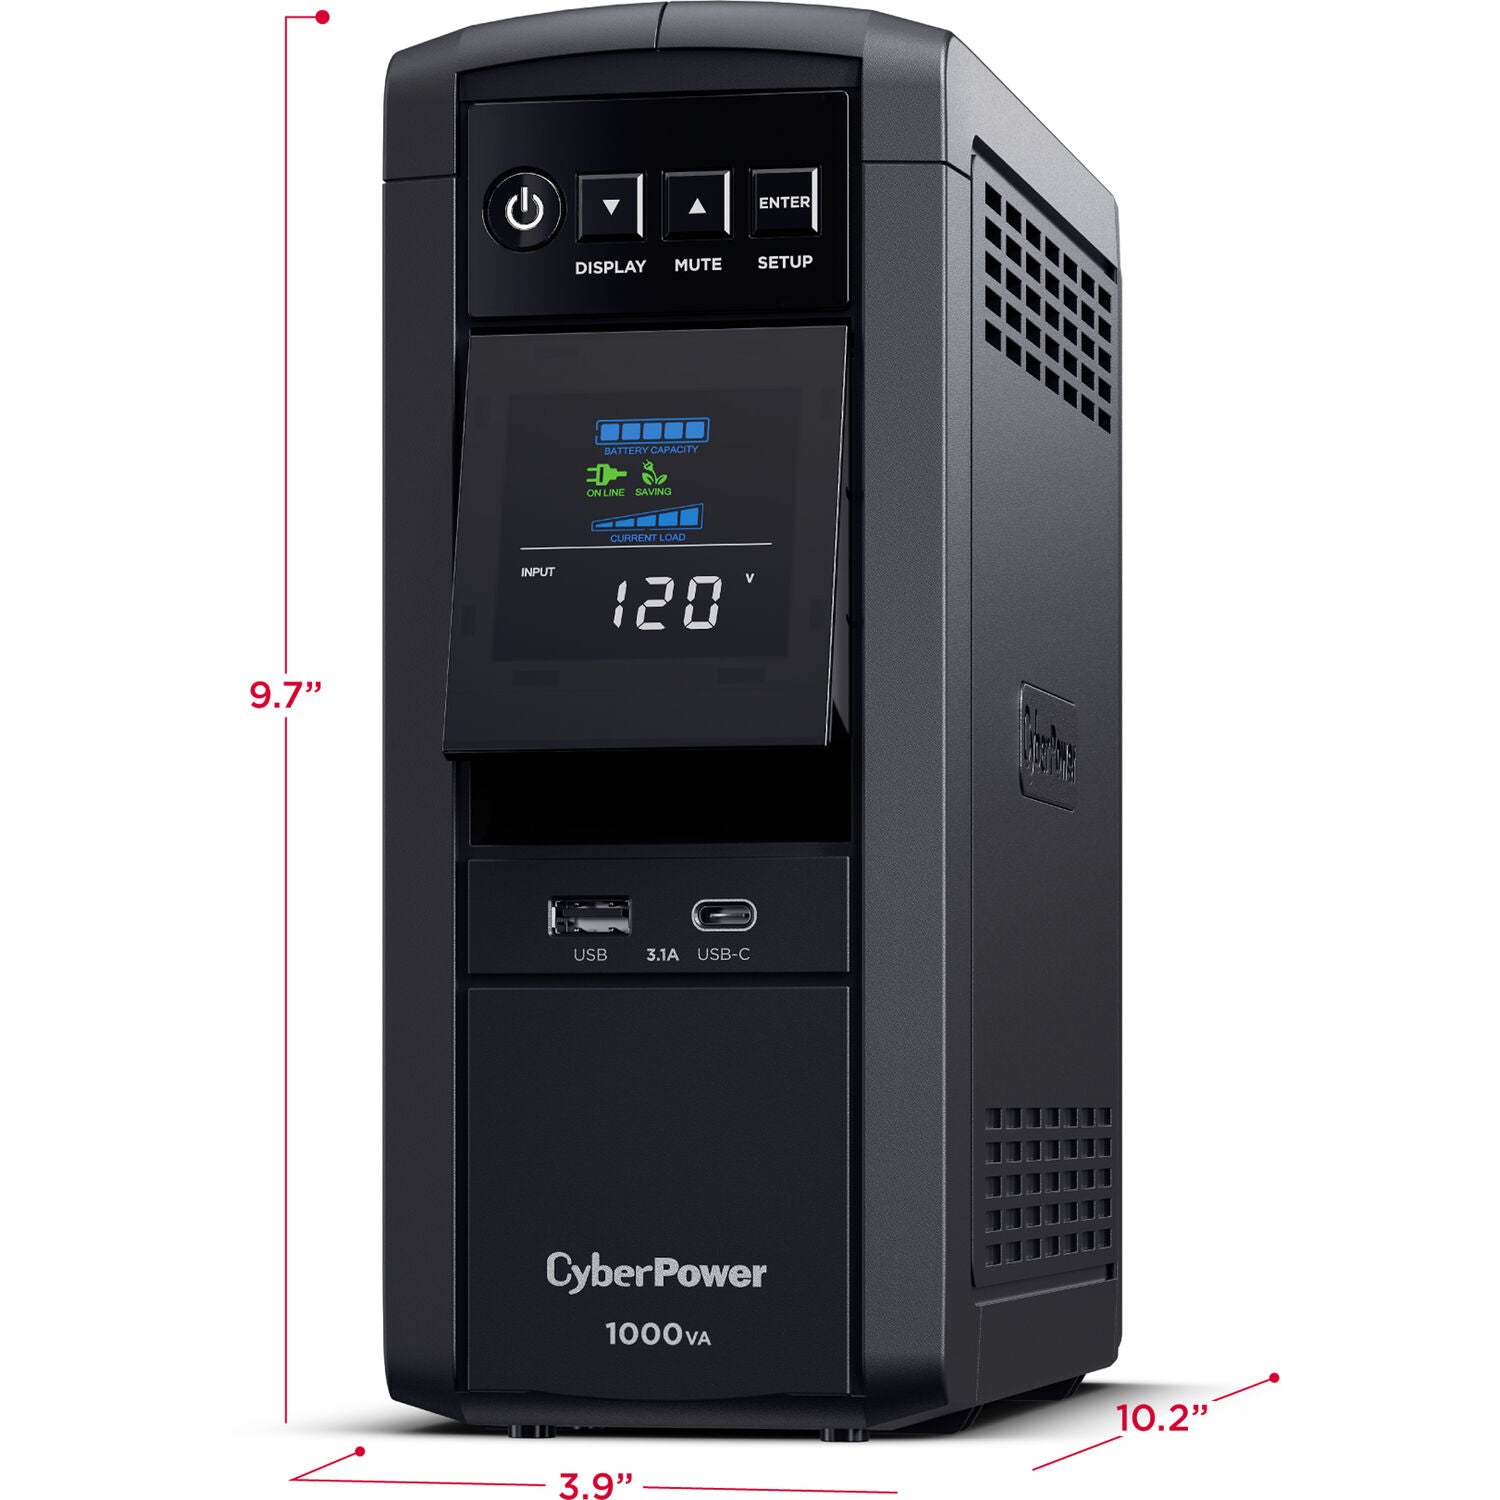 CyberPower CP1000PFCLCD-R PFC 1000VA / 600W Pure Sine Wave UPS System - New Battery Certified Refurbished